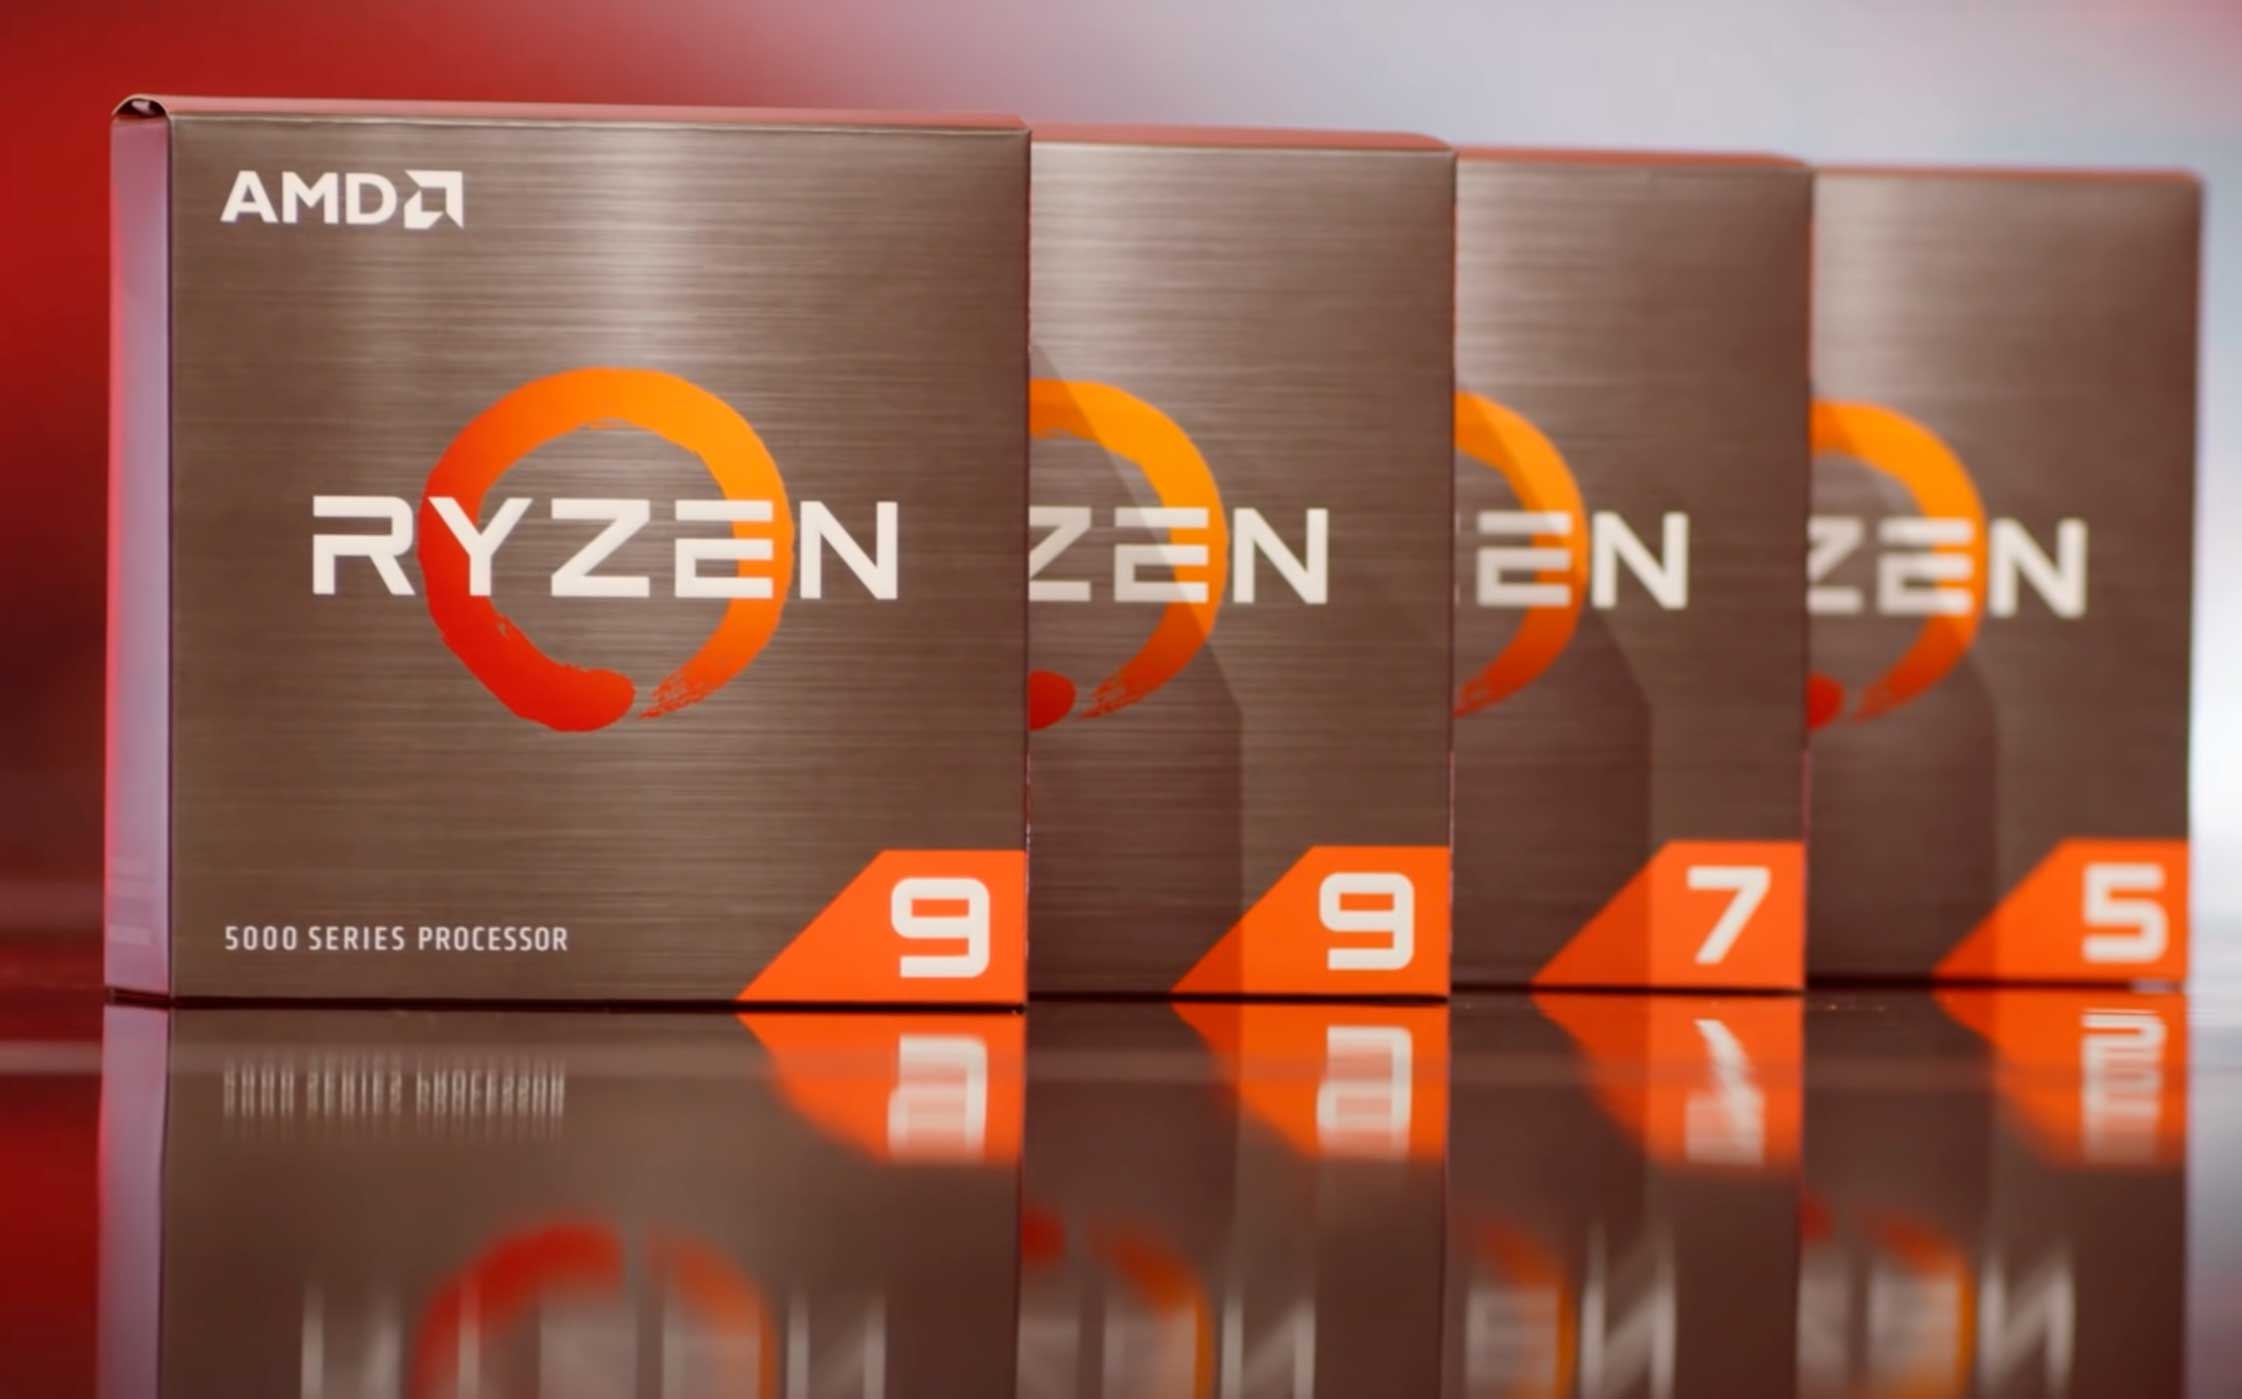 AMD is working to bring full Ryzen 5000 support to 300 Series motherboards.